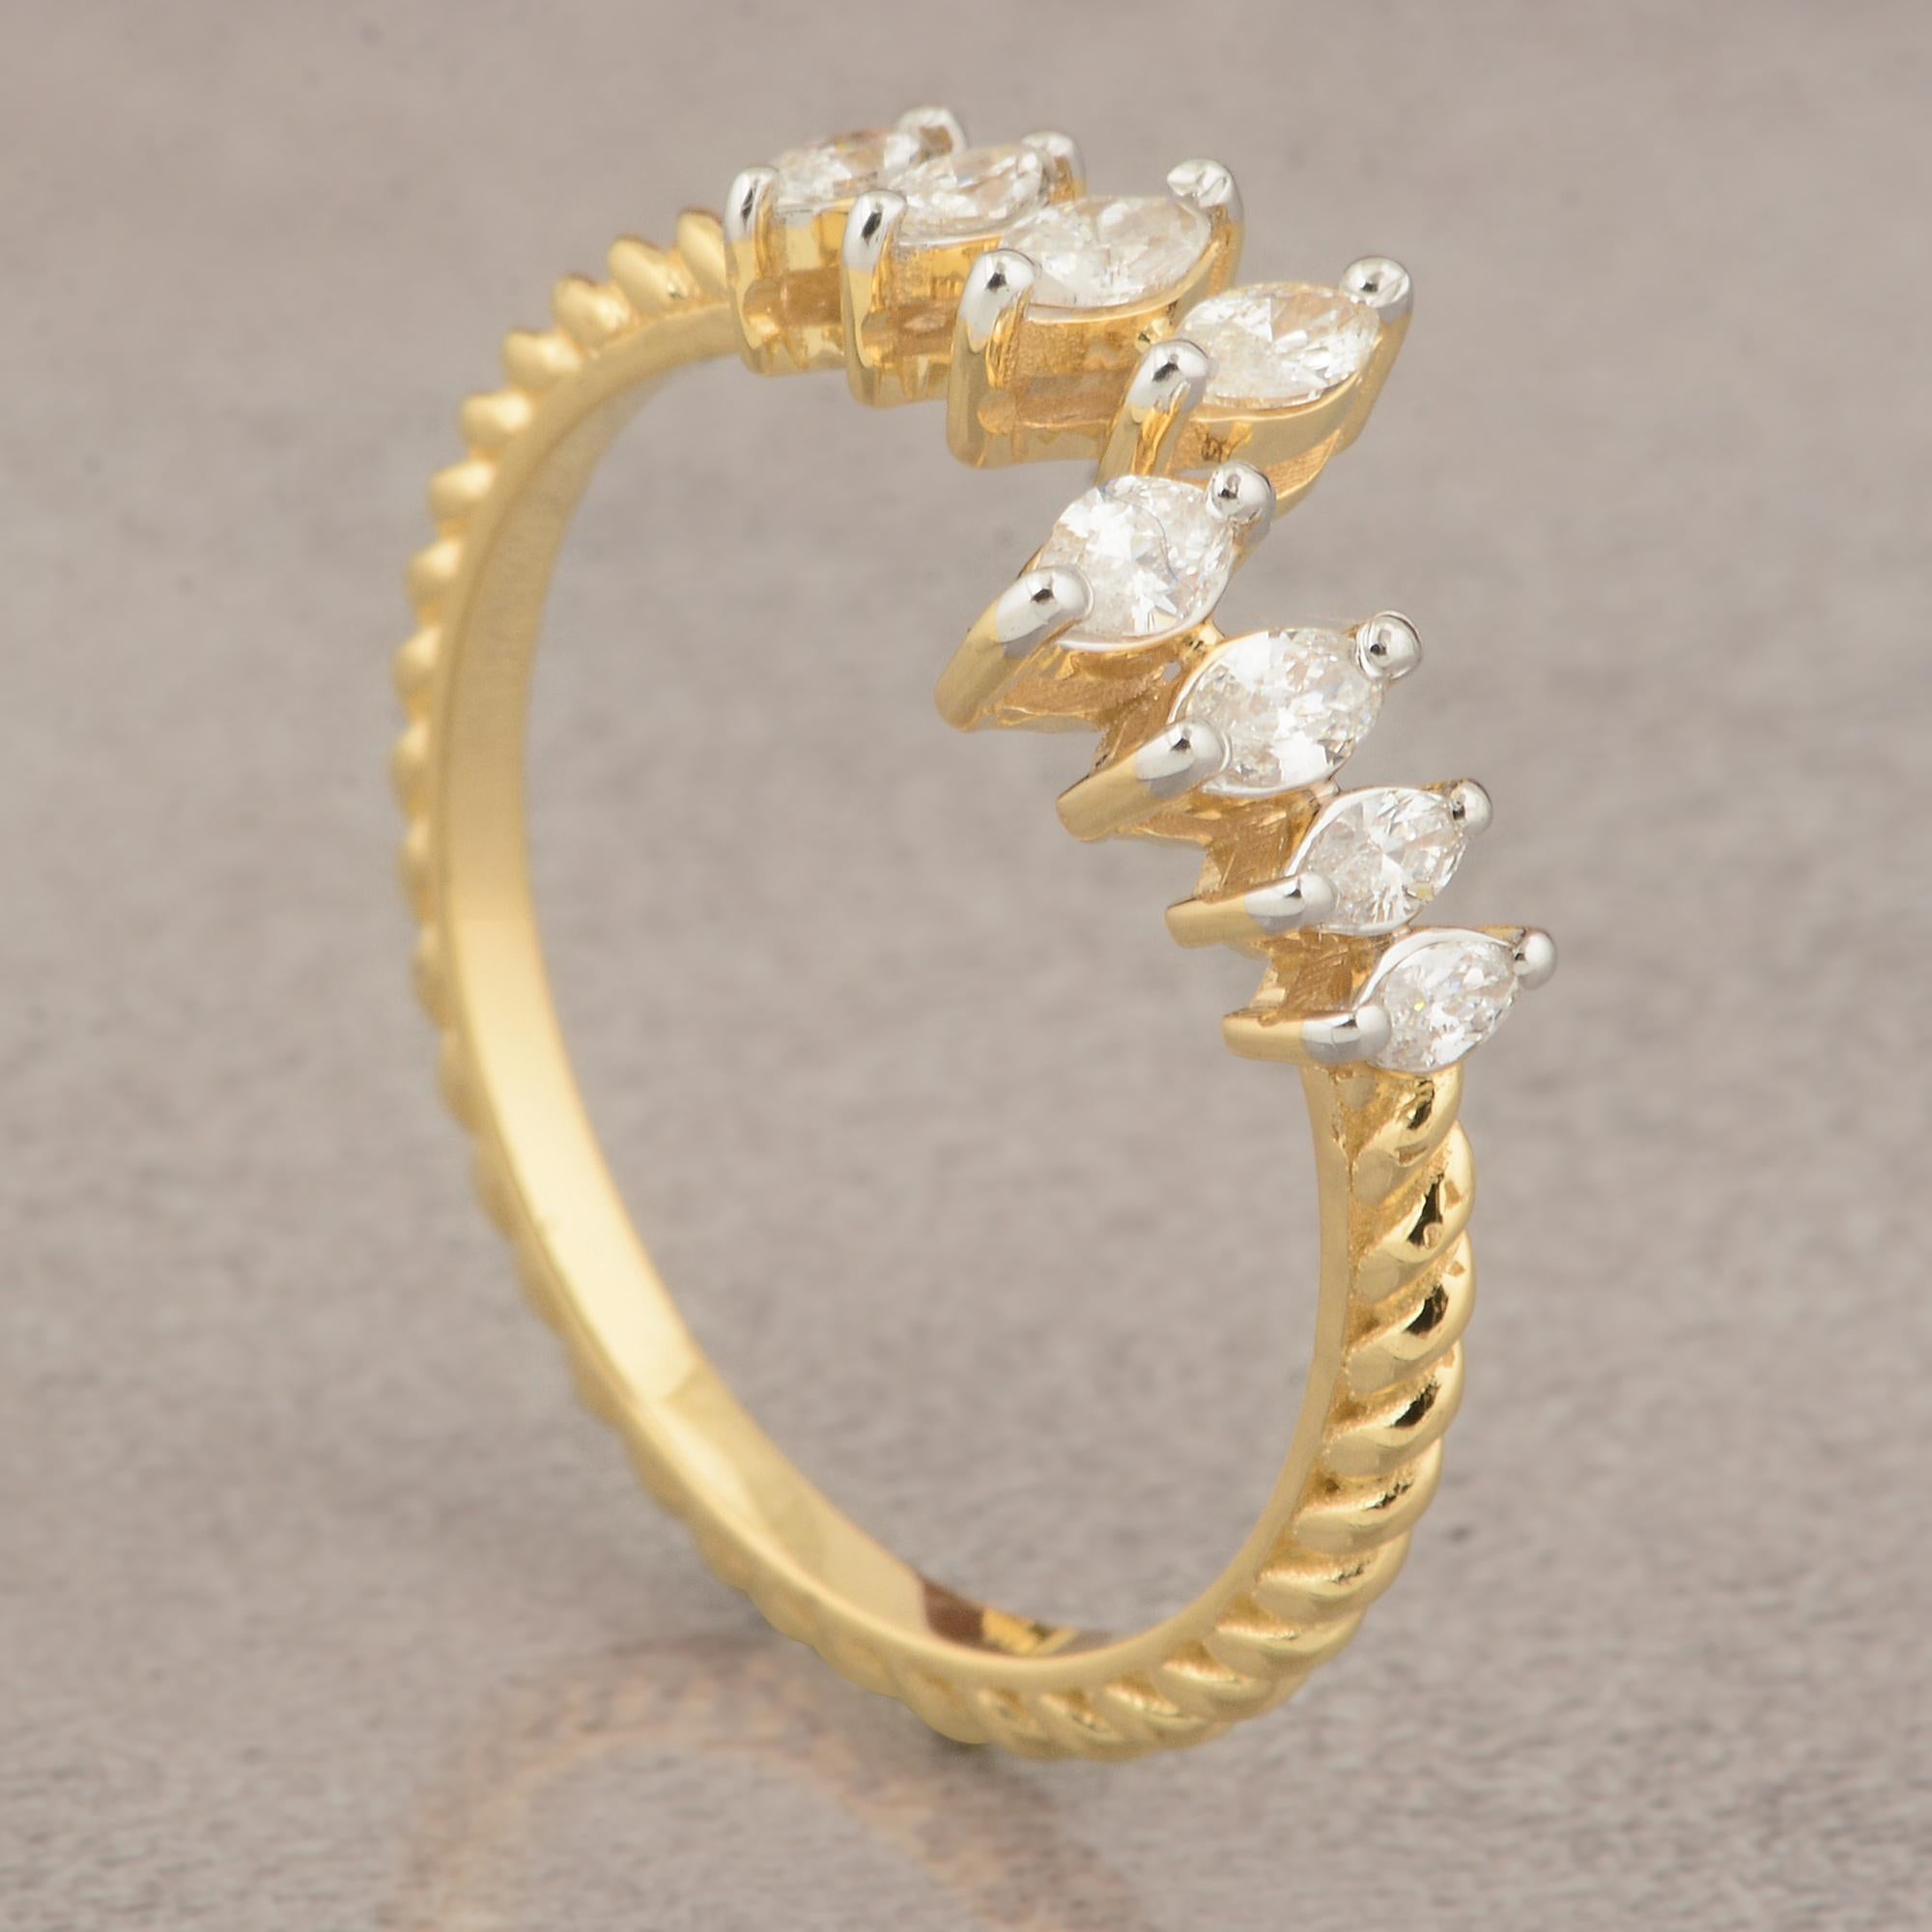 For Sale:  SI Clarity HI Color Marquise Diamond Wrap Ring 18 Karat Yellow Gold Fine Jewelry 4